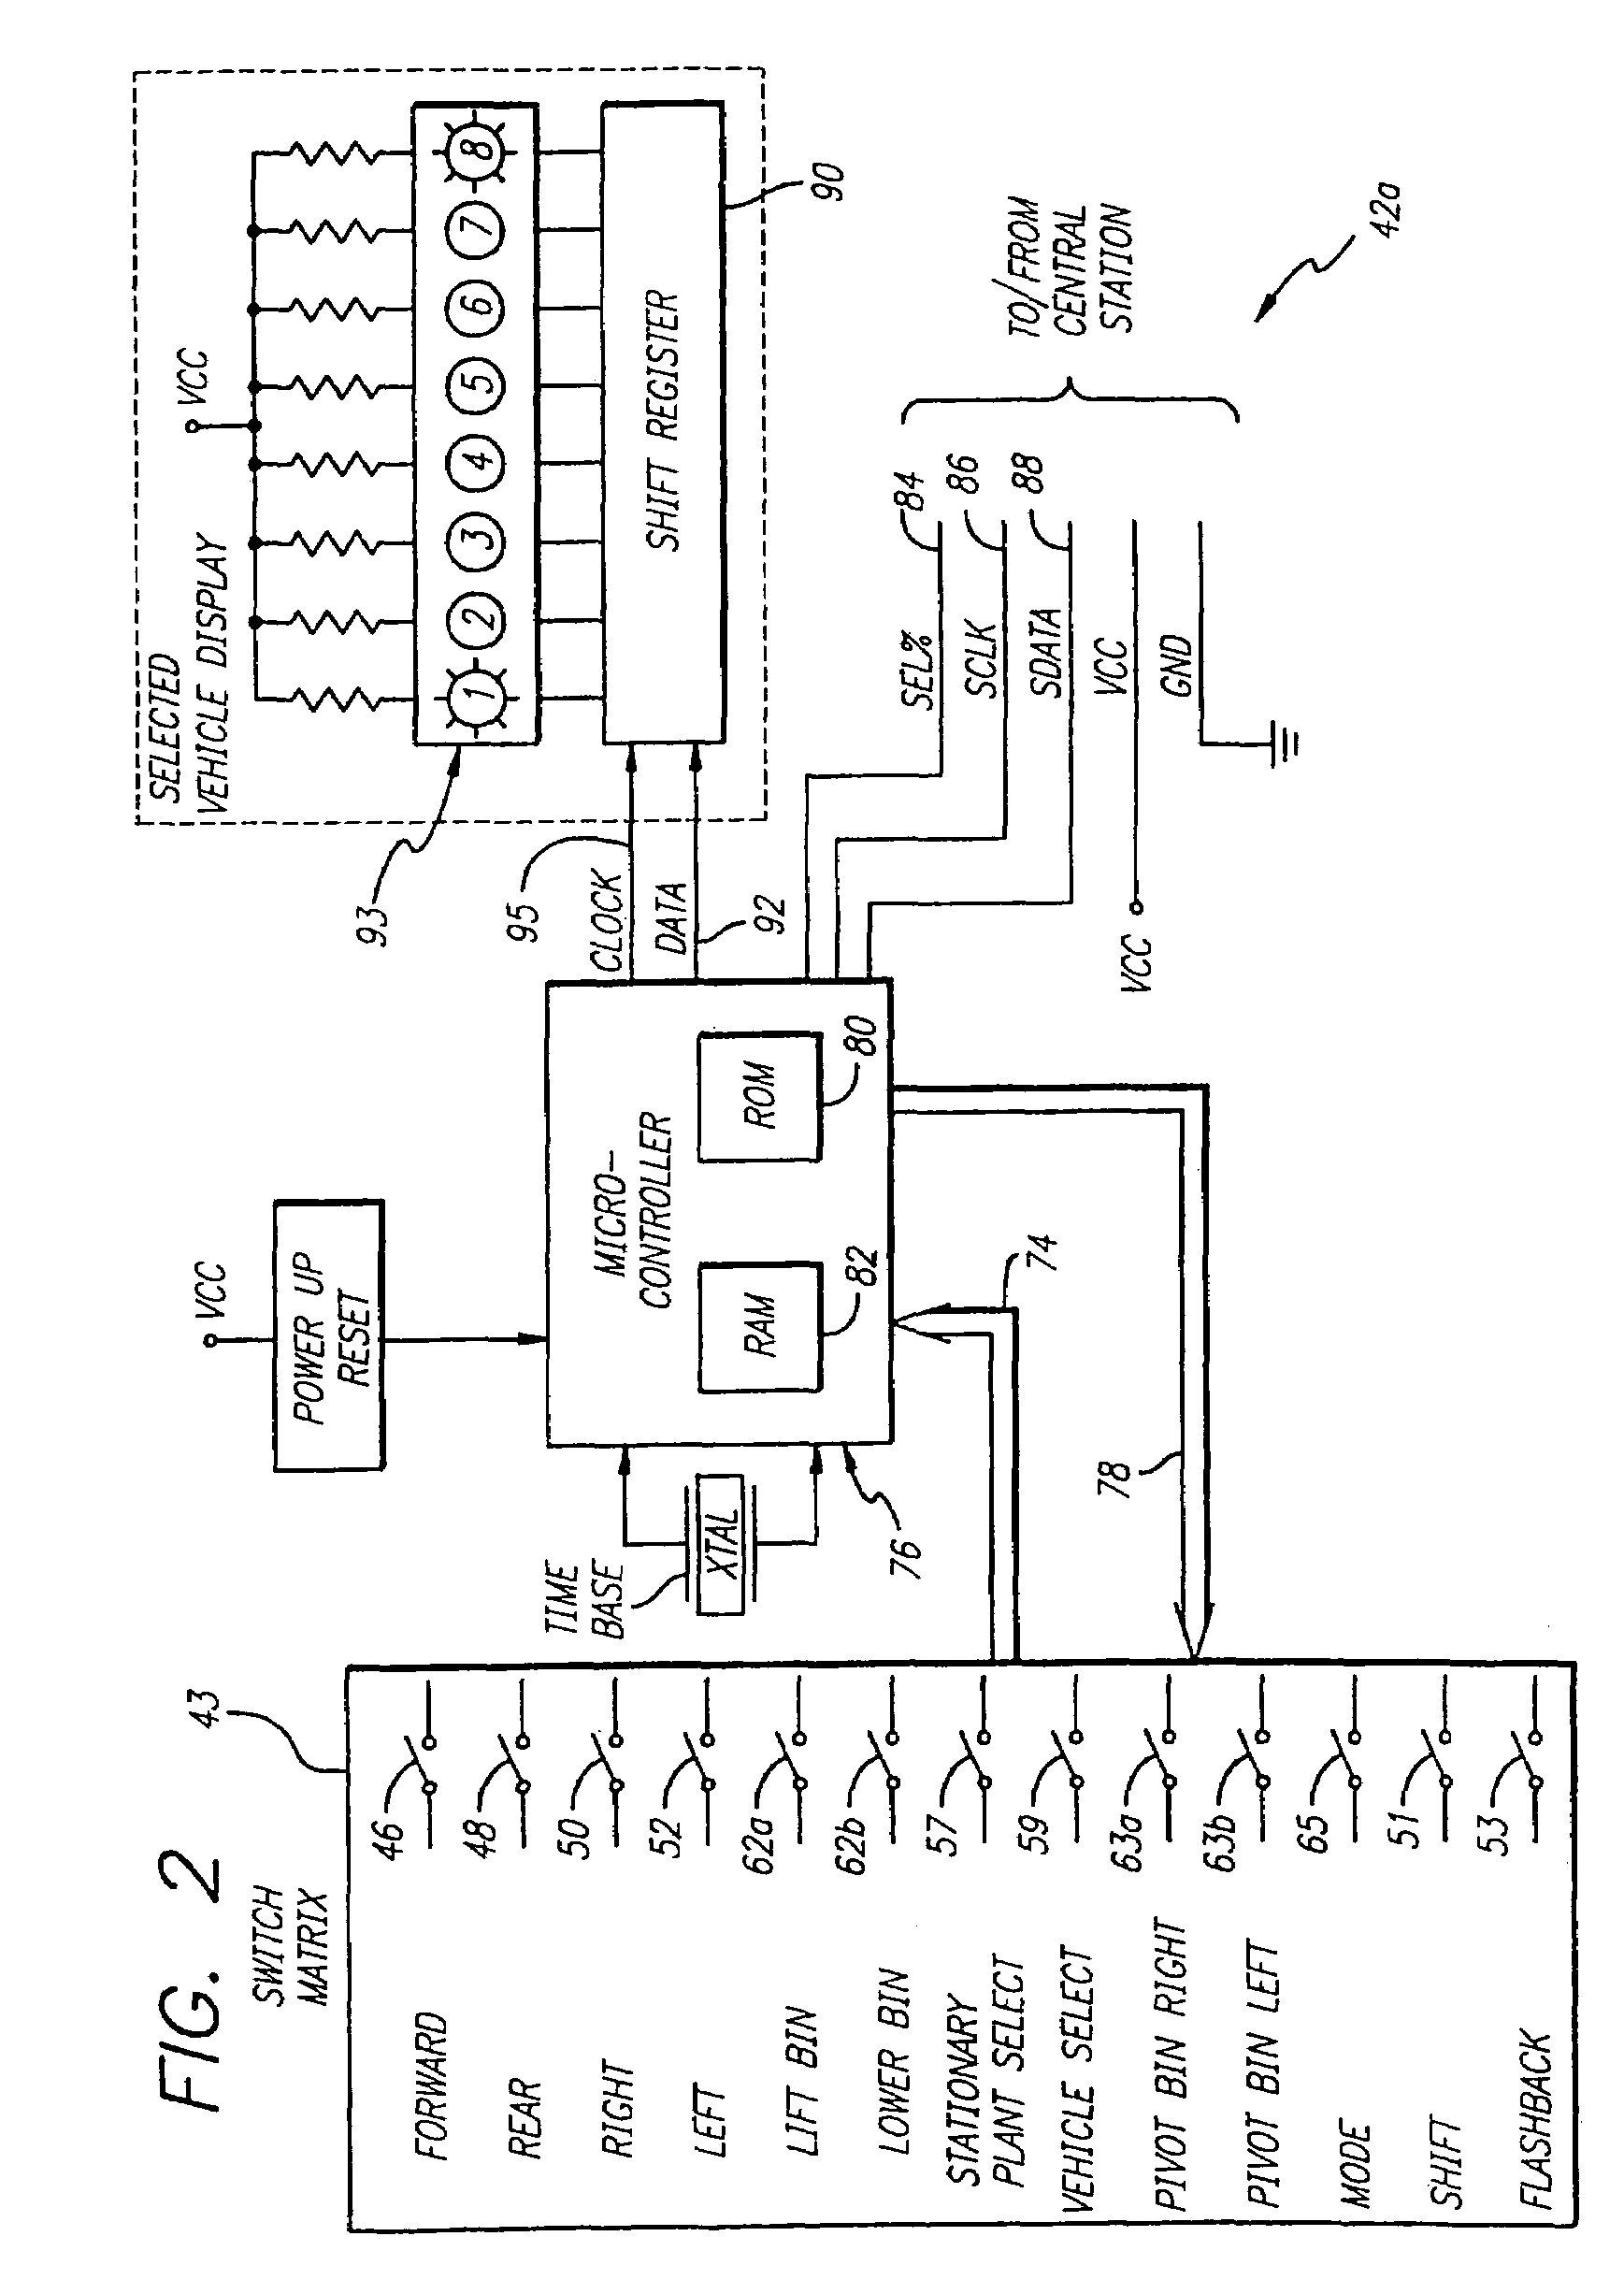 System and method for controlling the operation of toys